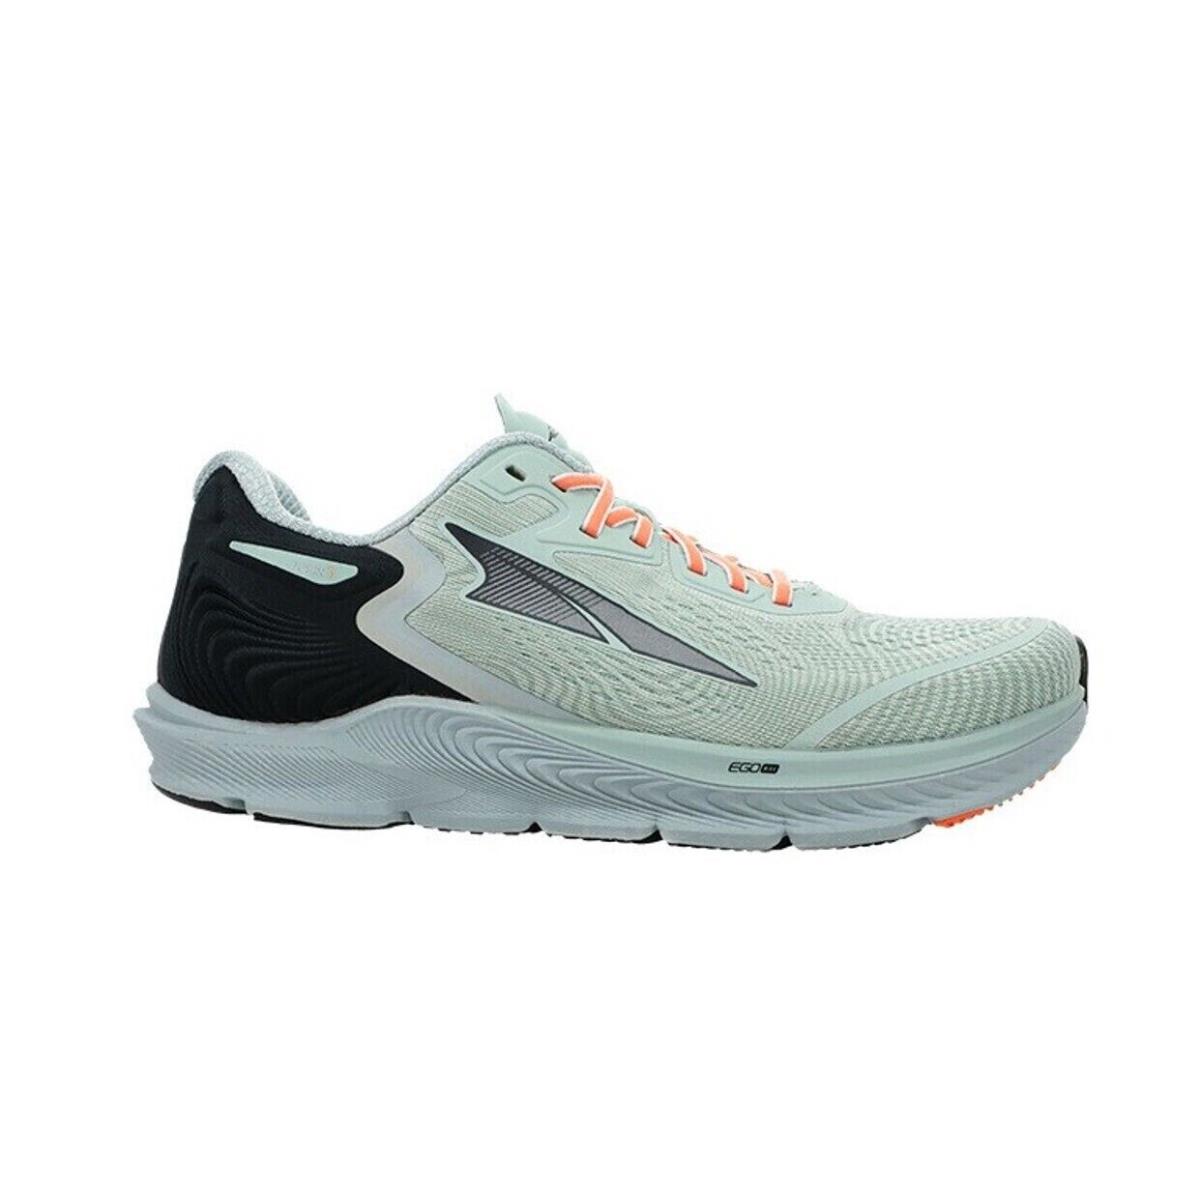 Altra Footwear Women`s Torin 5 Performance Shoes - Gray/coral US Sizes 7 M/w